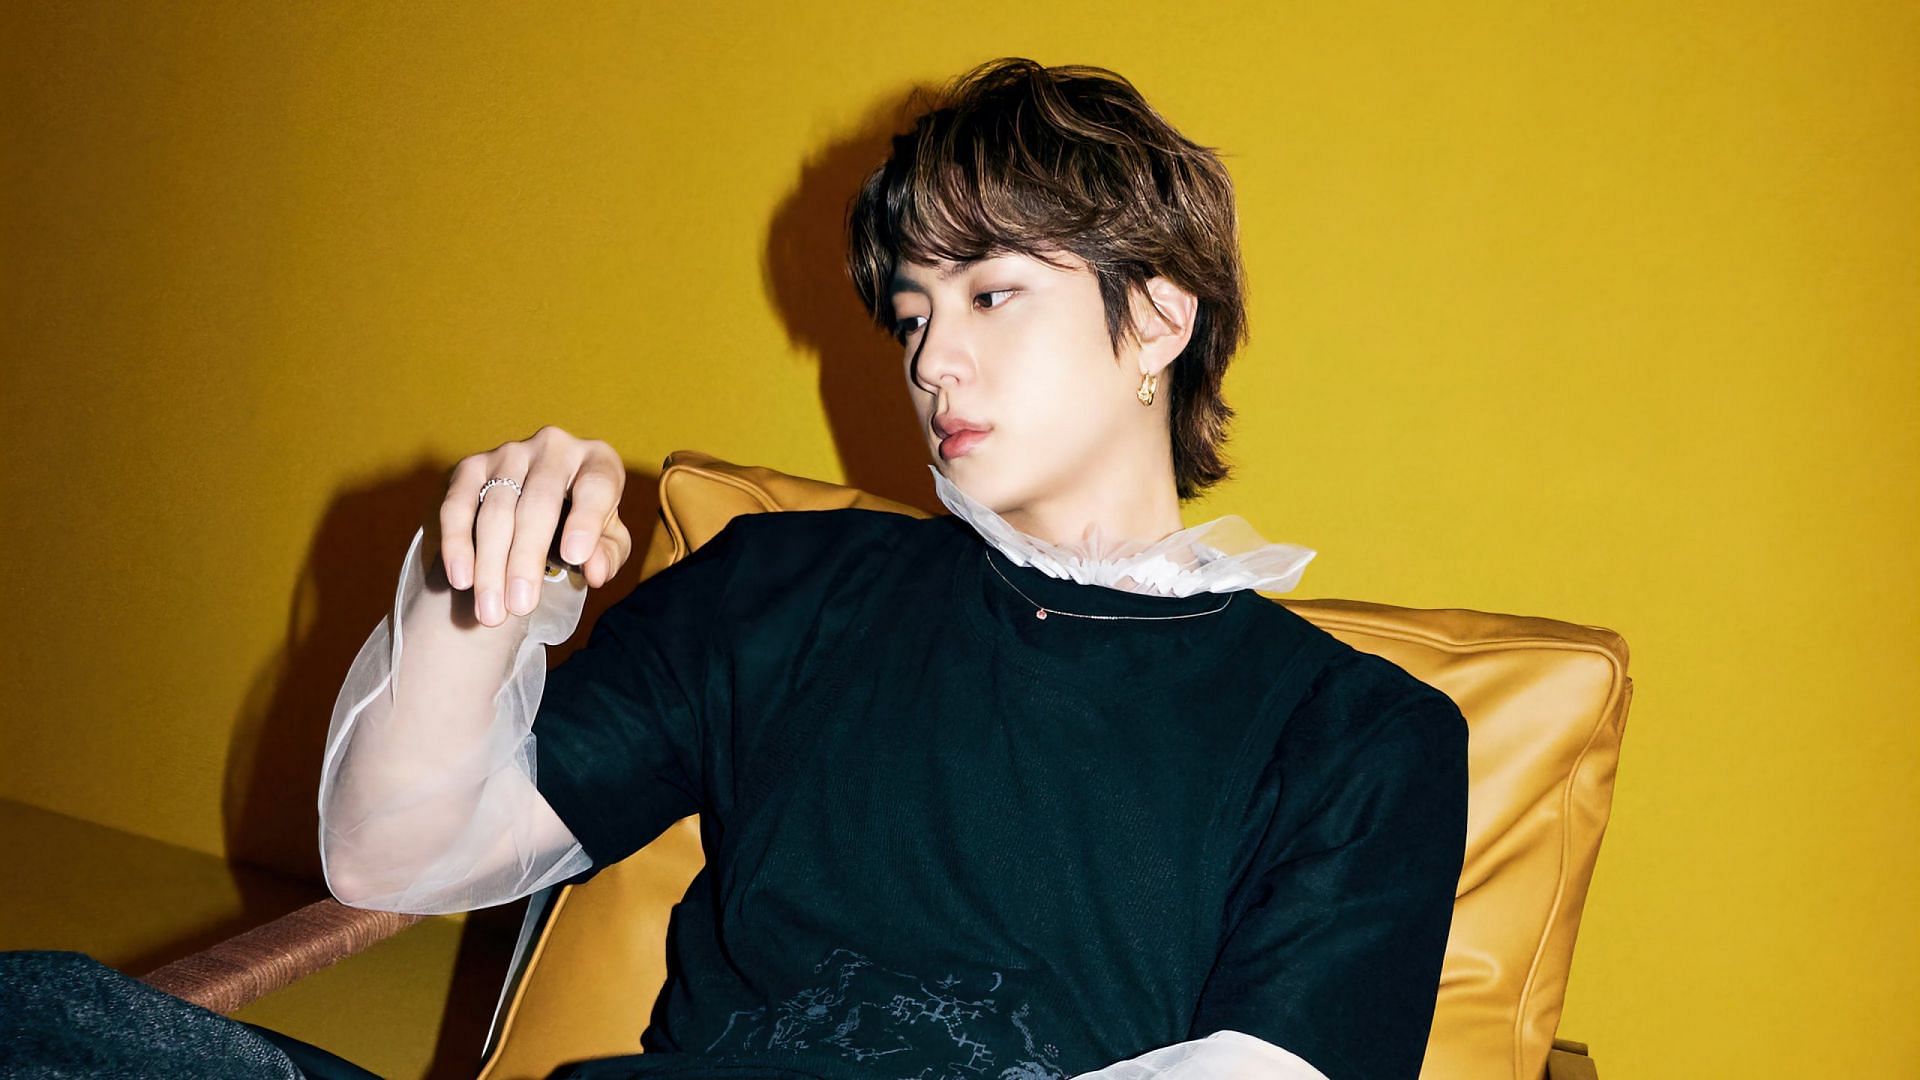 Worldwide Handsome BTS Jin ONCE AGAIN Captivates Fashion Editors